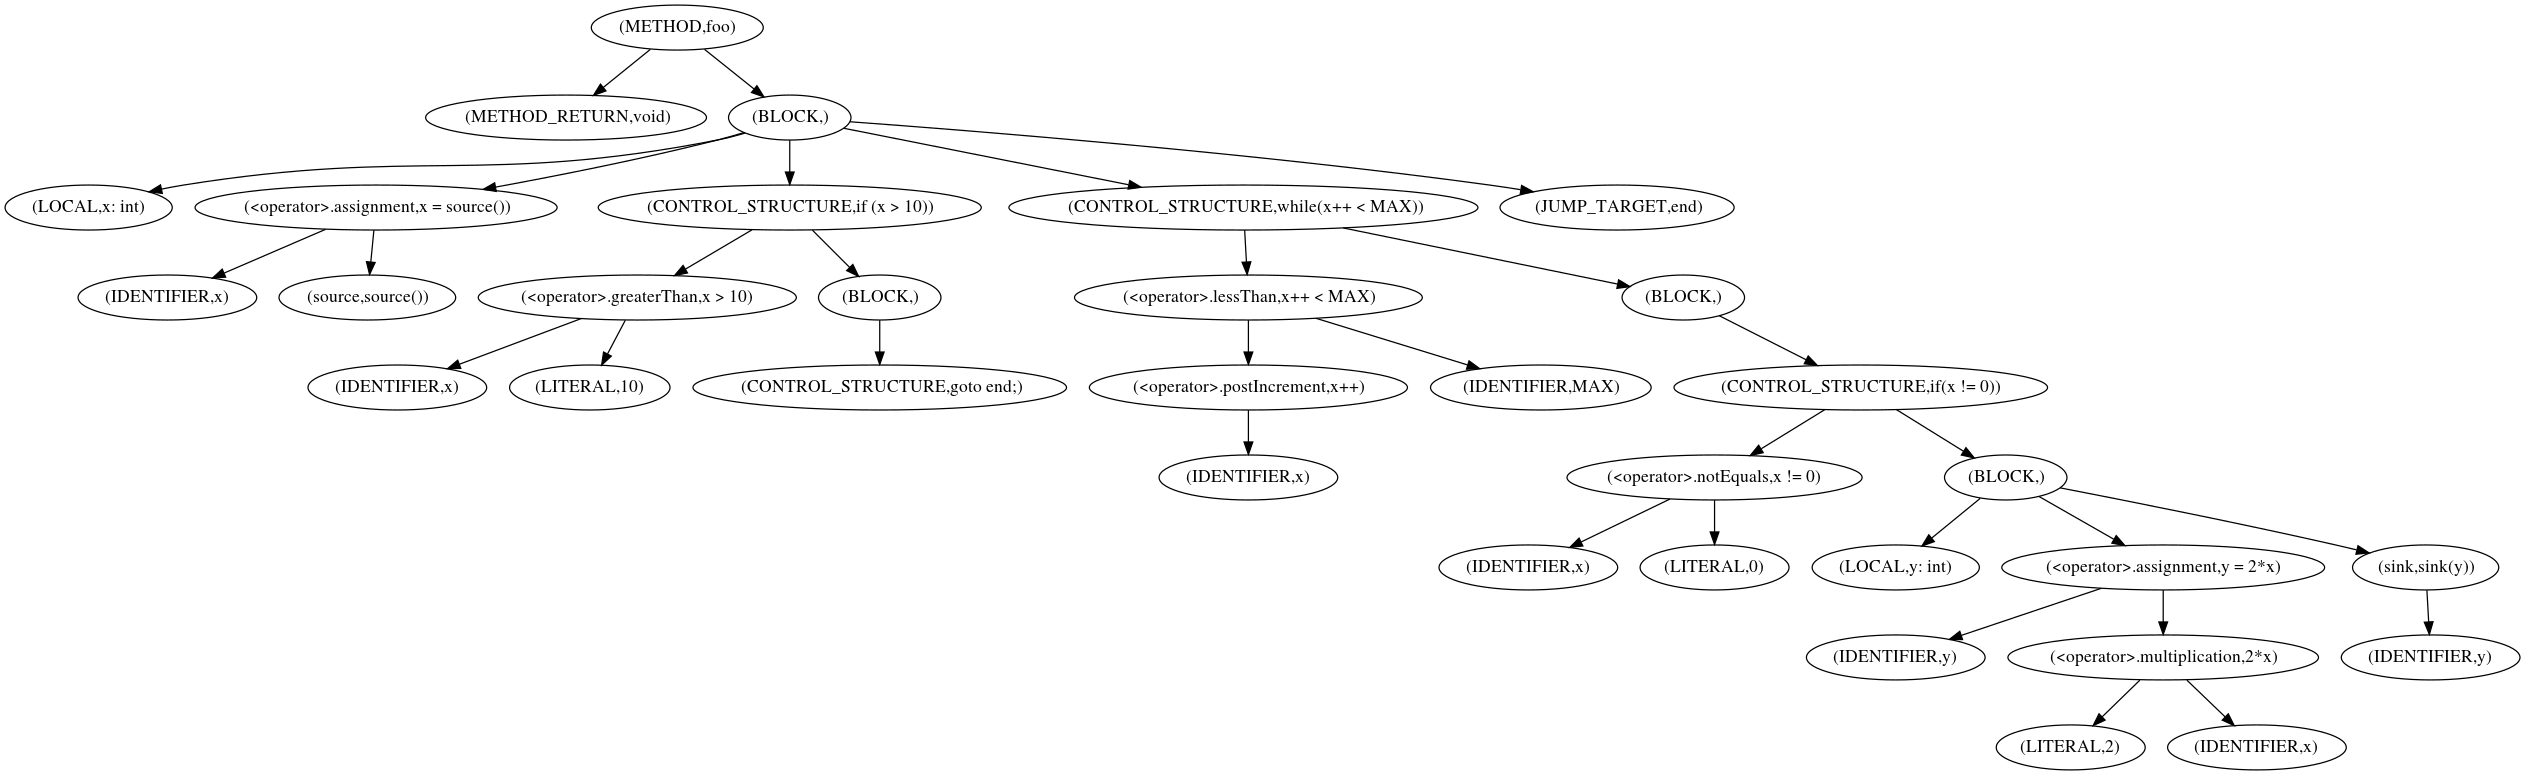 Fig. 4: Abstract syntax tree containing
structured and unstructured control structures